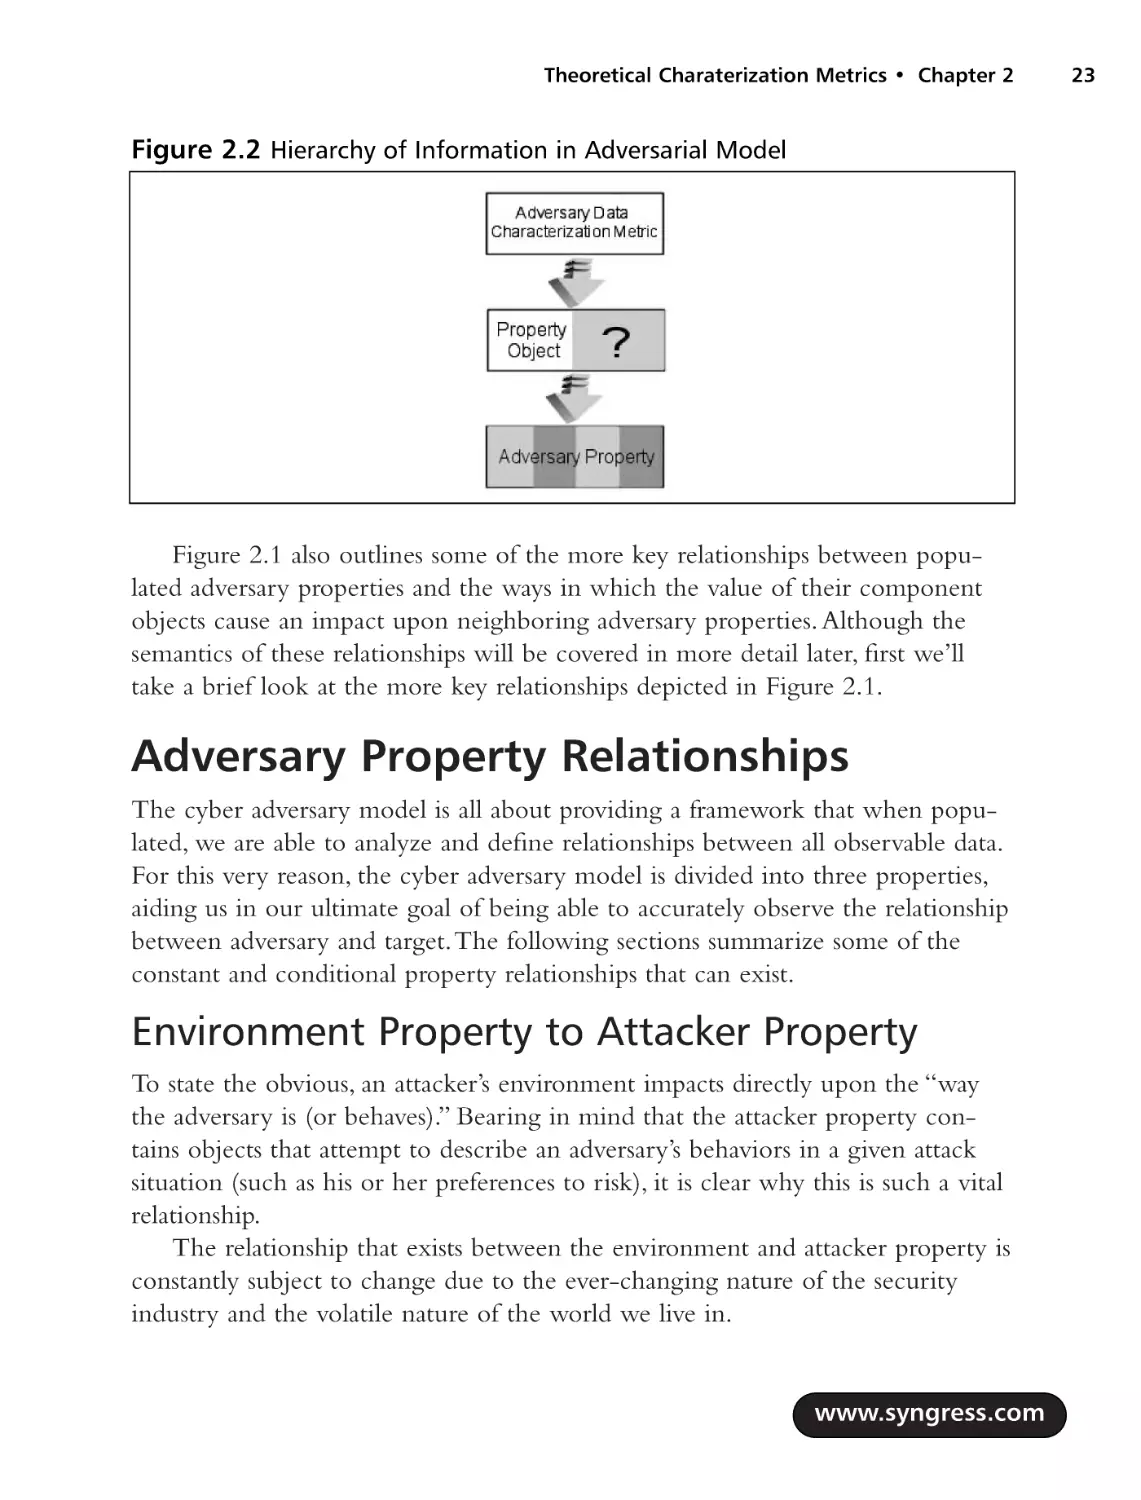 Adversary Property Relationships
Environment Property to Attacker Property